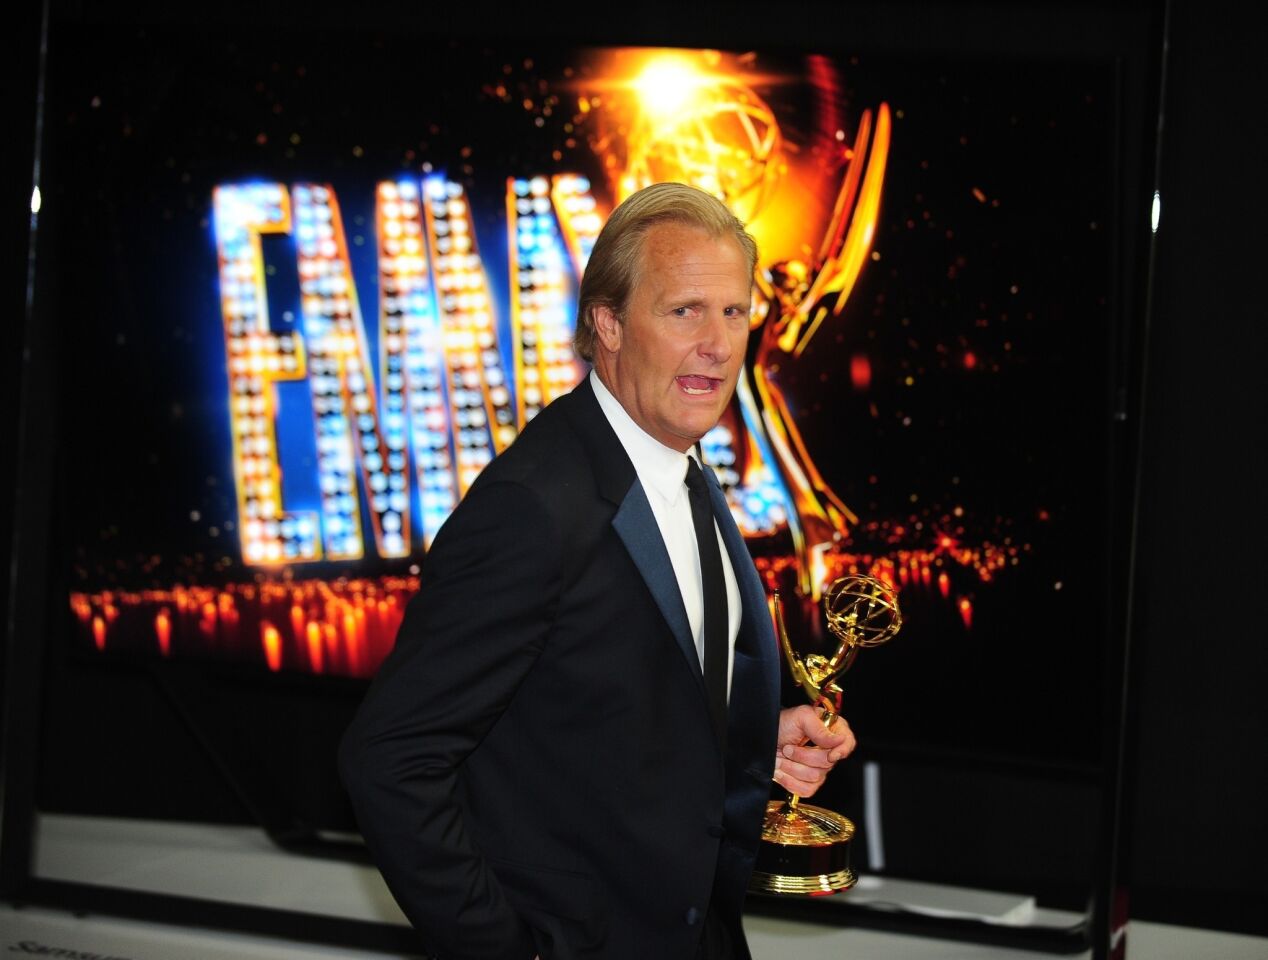 There's nothing like giving an award to an underdog to get some good TV. For best actor in a drama series, most thought it would go to Bryan Cranston, Kevin Spacey or Damian Lewis. But no, it was Jeff Daniels, starring in the polarizing HBO drama "The Newsroom," who won. And just to prove how much he didn't expect it, Daniels came on stage chewing gum. "Well, crap," he said, by way of acceptance. Indeed.